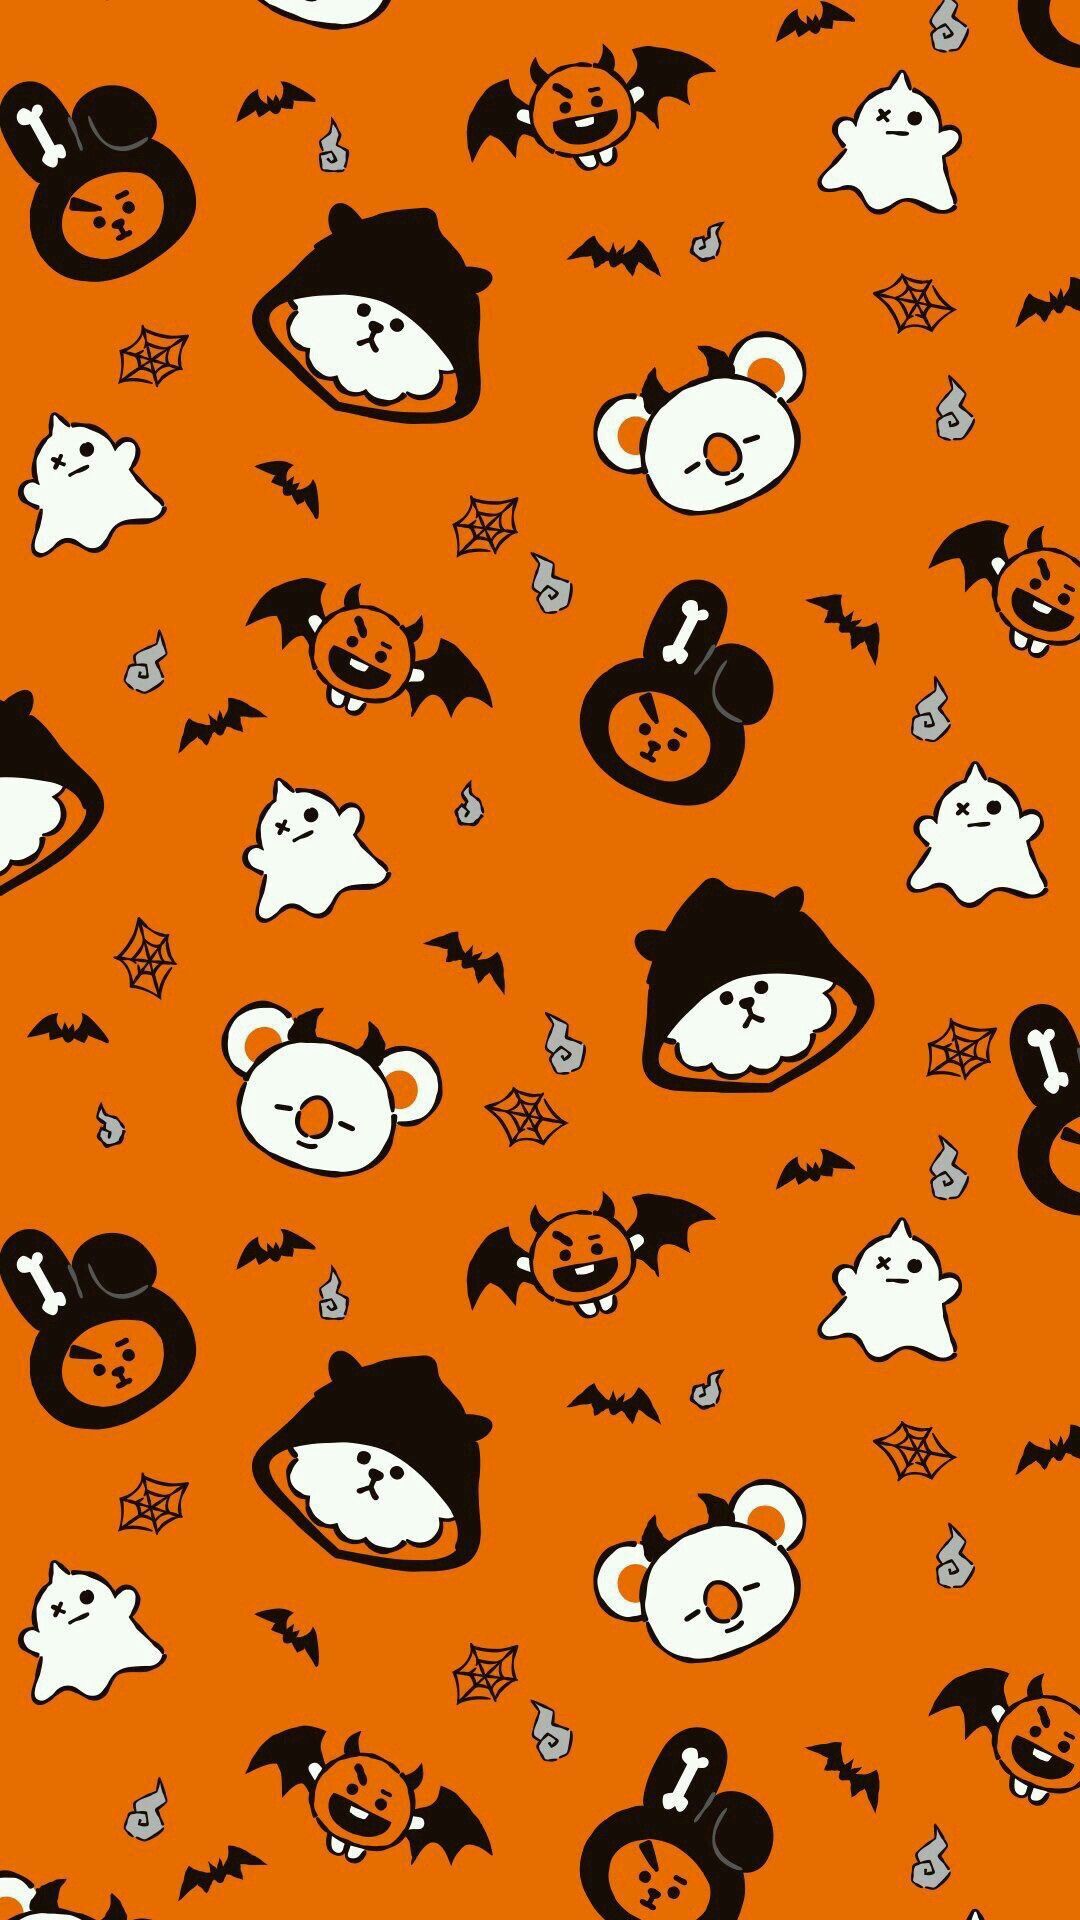 Bewitched Screens with Aesthetic Halloween Wallpapers